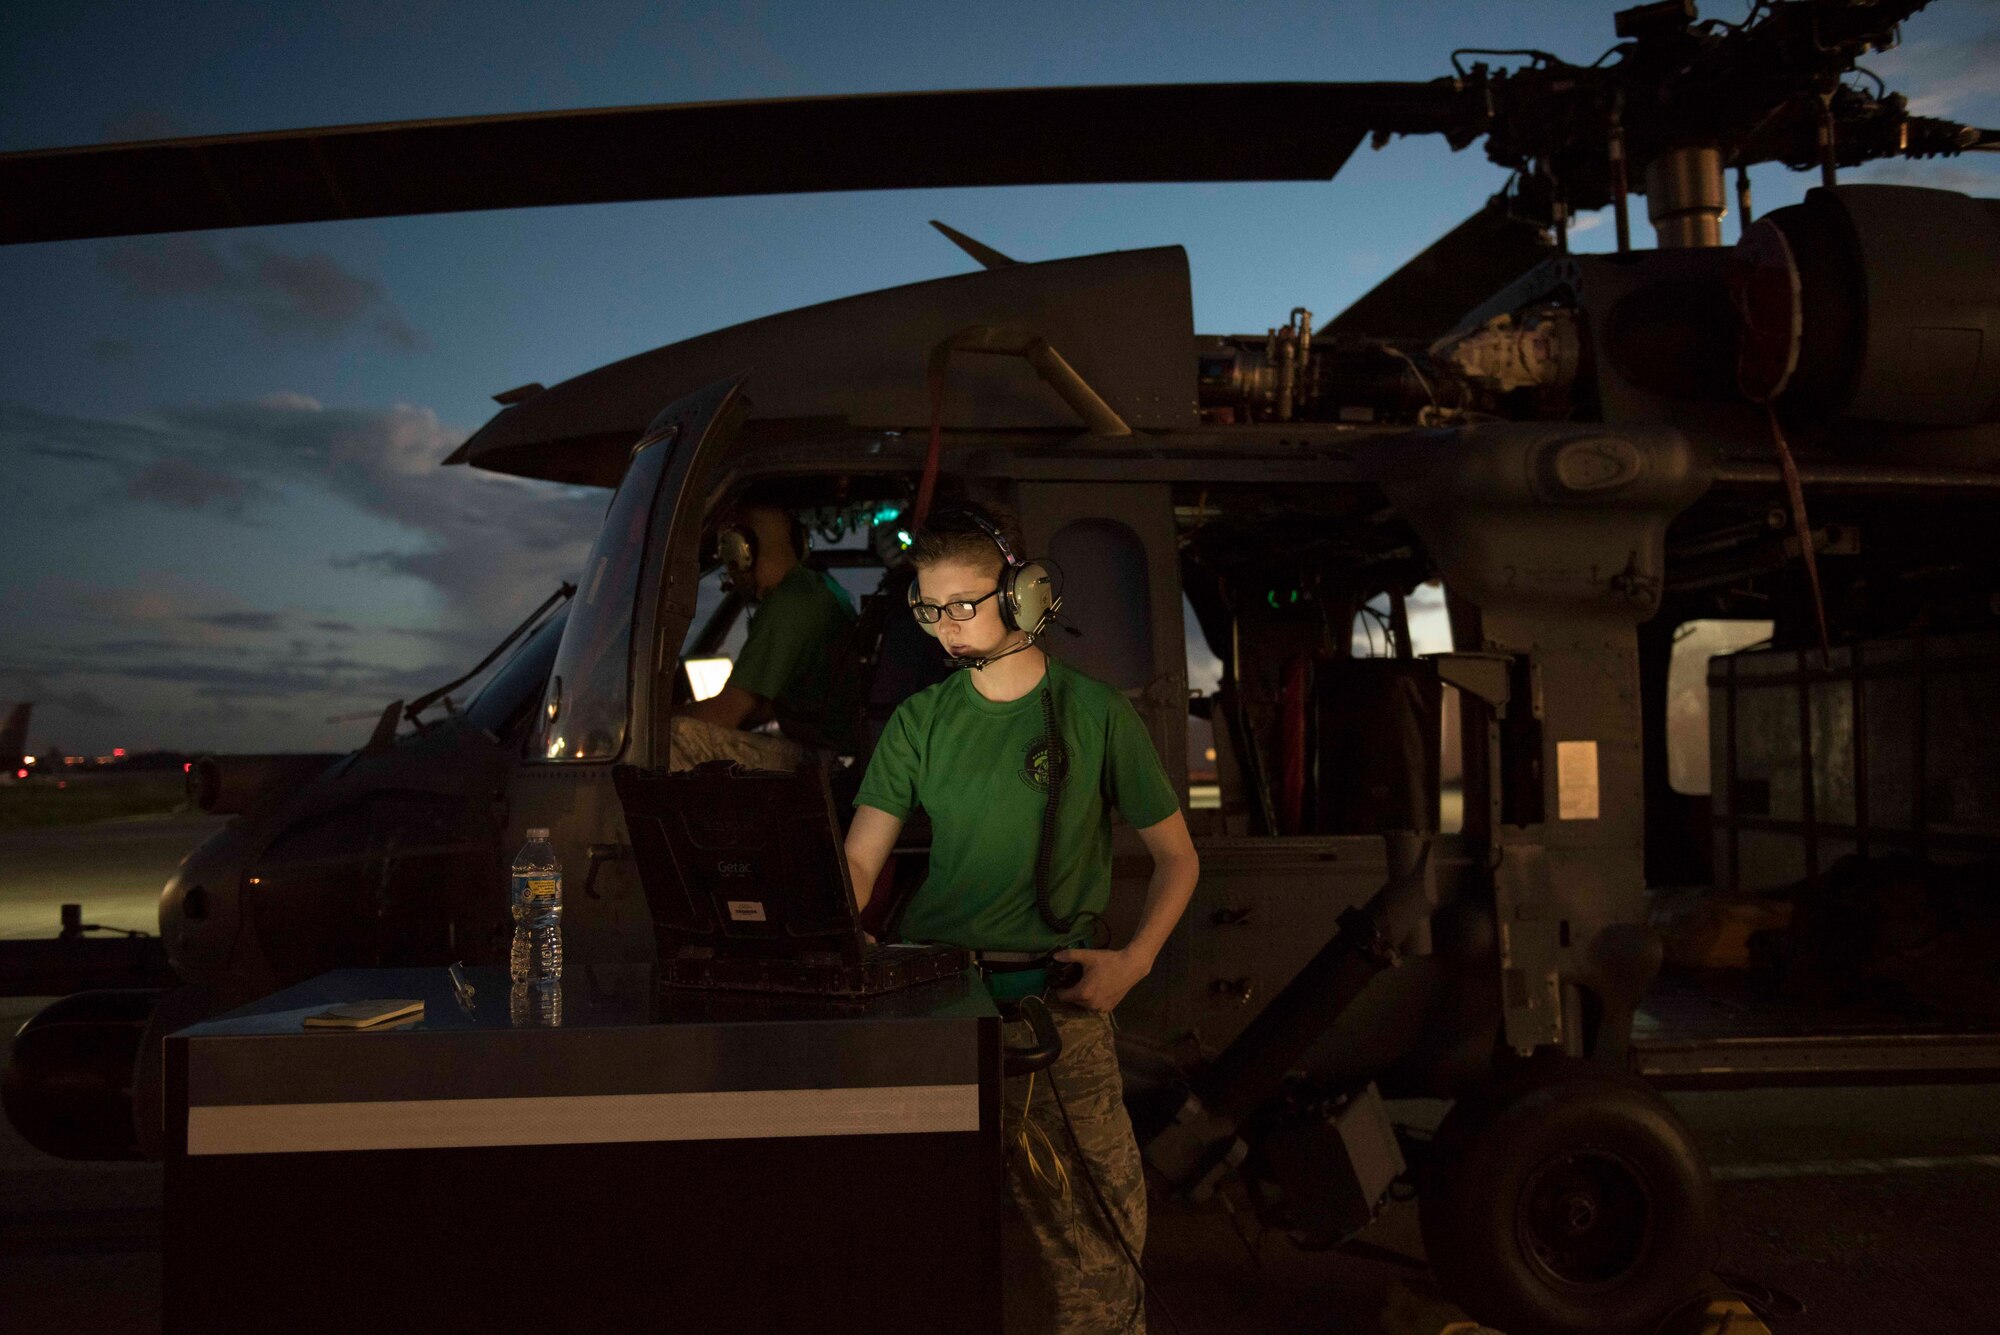 U.S. Air Force Airman 1st Class Jessica Games, 33rd Helicopter Maintenance Unit flight control systems technician, checks technical orders while performing maintenance on an HH-60G Pave Hawk Oct. 25, 2016, at Kadena Air Base, Japan. The 33rd HMU technicians work around the clock to ensure the helicopters are deployable at a moment’s notice. (U.S. Air Force photo by Senior Airman Omari Bernard/Released)